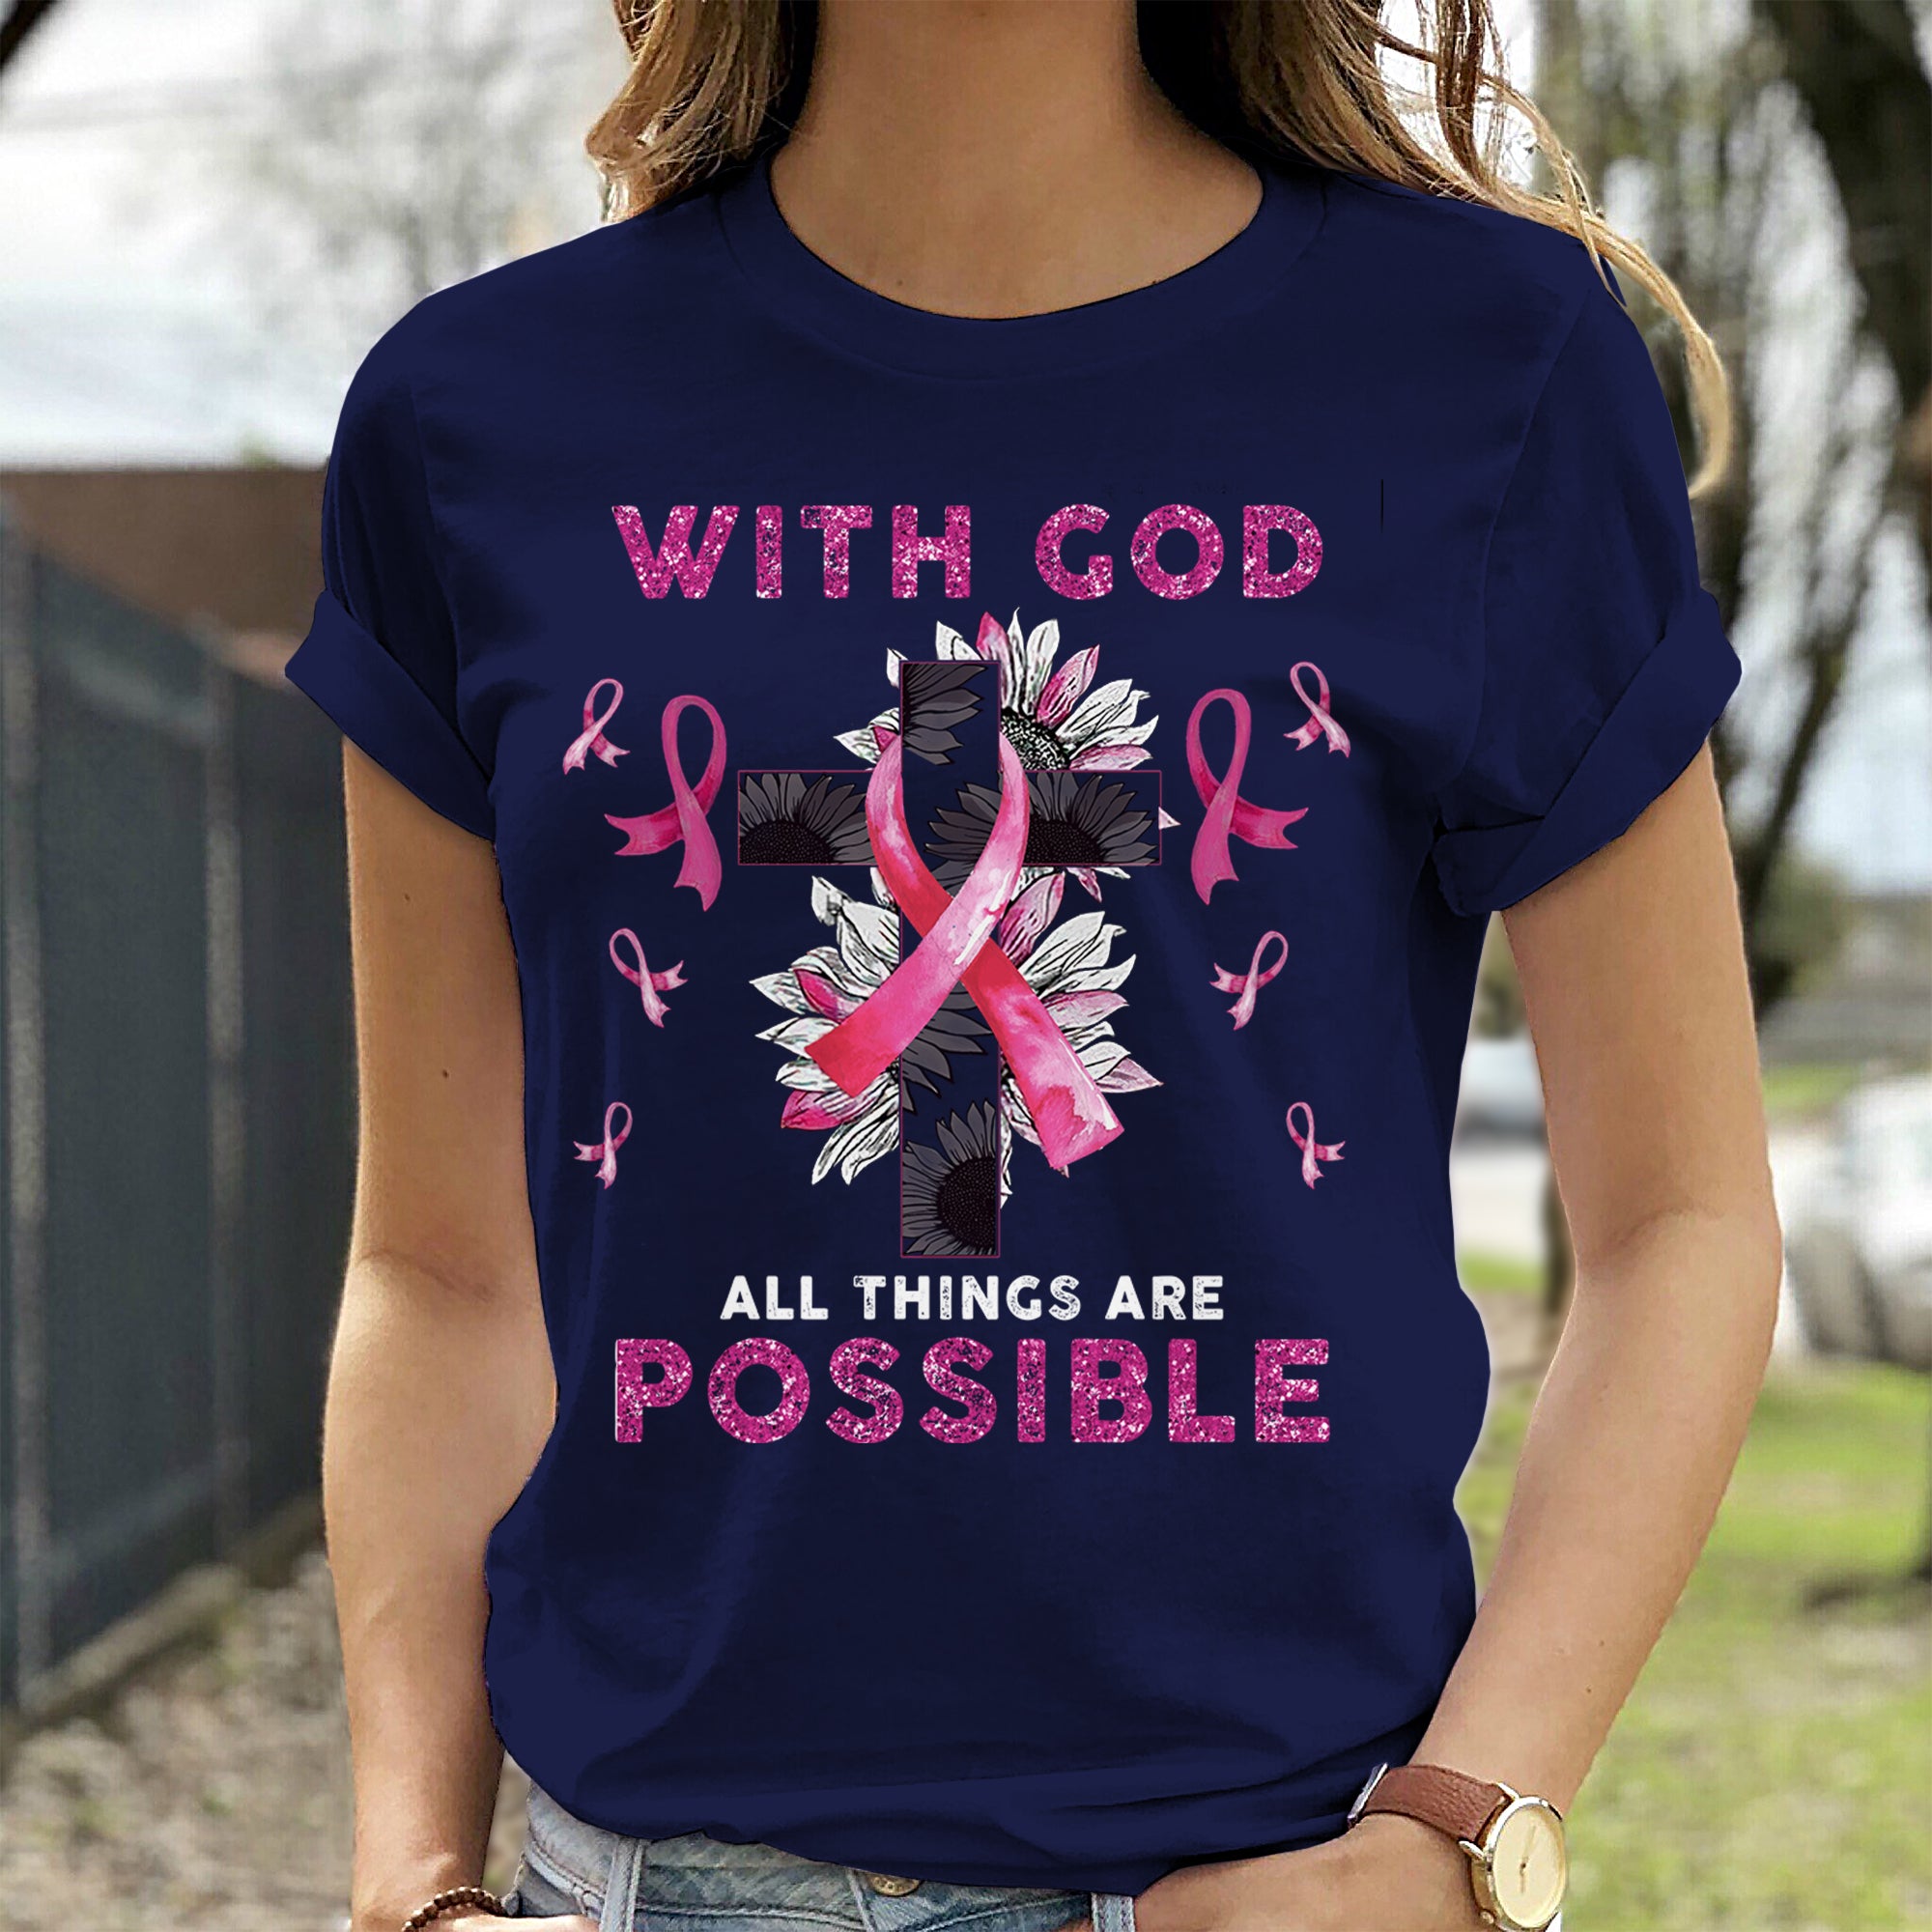 With God All Things Are Possible Breast Cancer Awareness Cross Sunflowers With Pink Ribbon T-Shirt